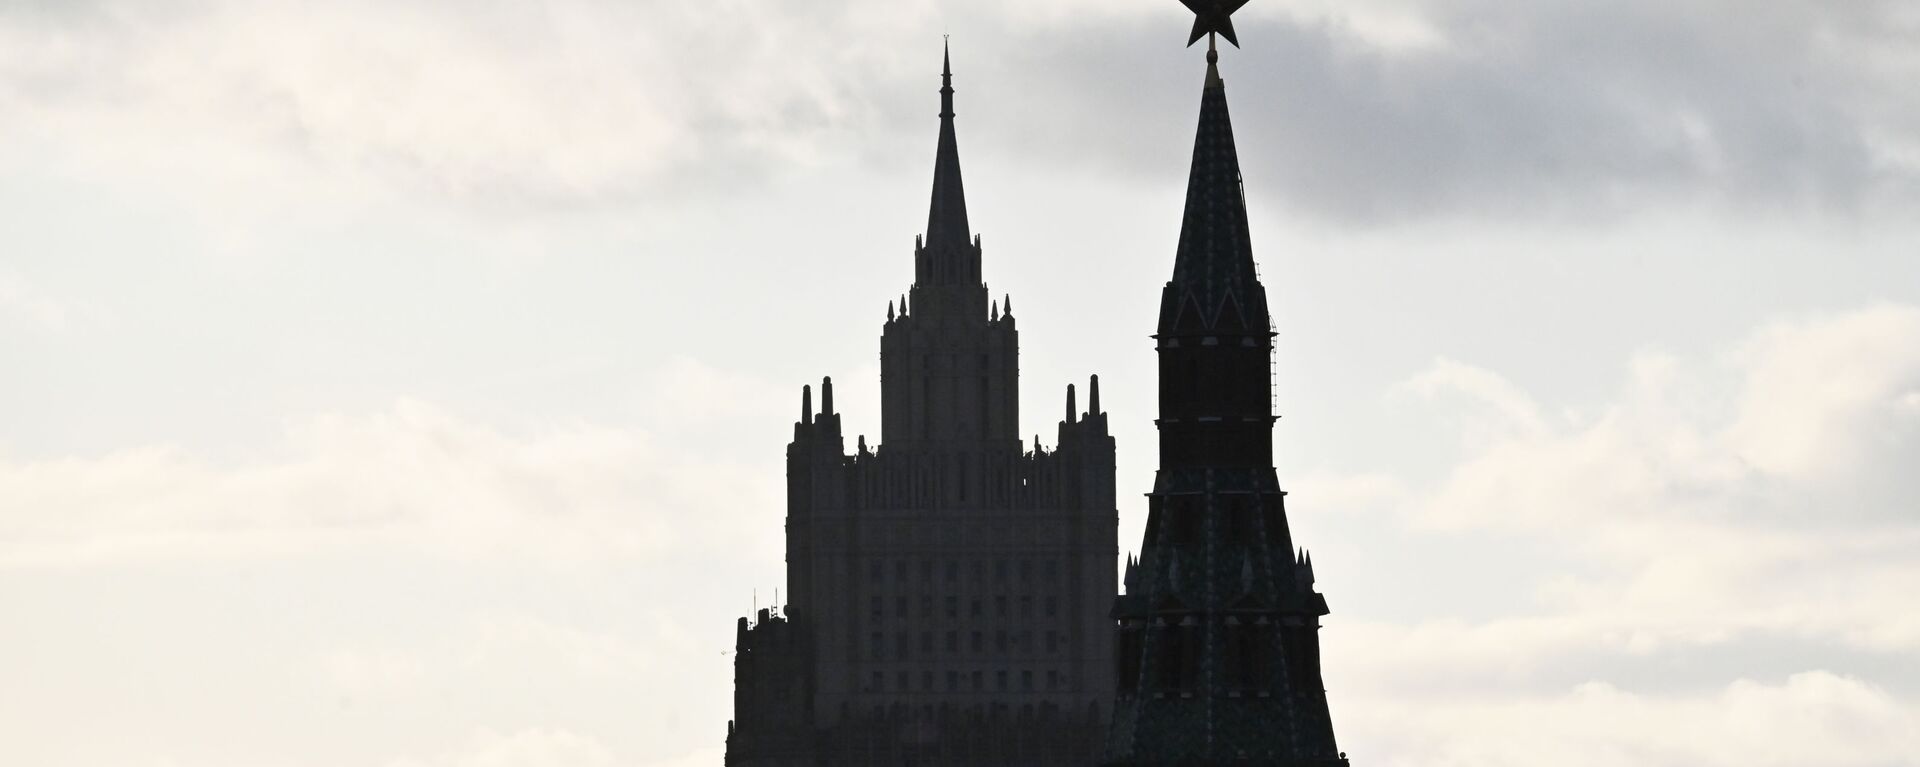 A view of the Russian Foreign Ministry and one of the Kremlin towers - Sputnik International, 1920, 27.12.2021